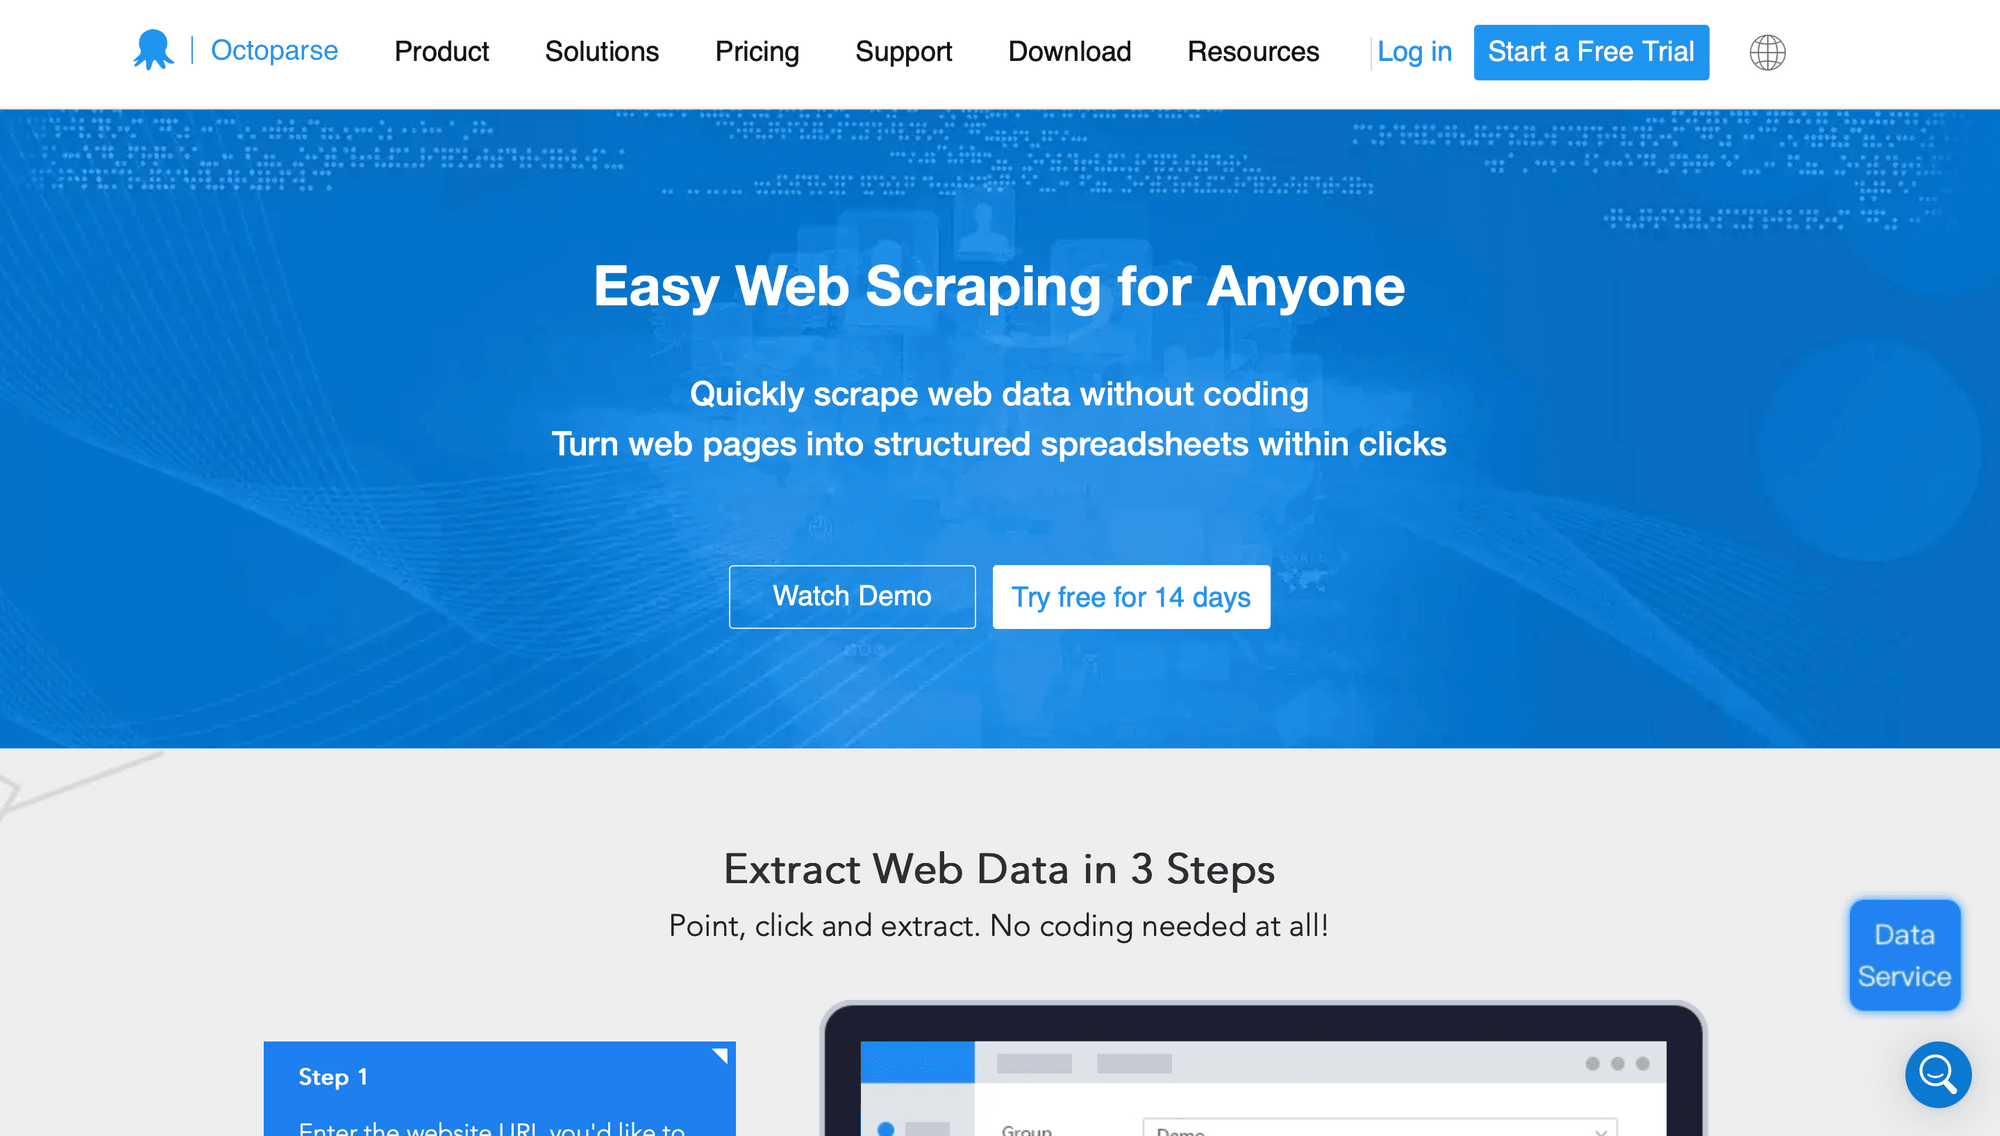 Screenshot of Octoparse home page